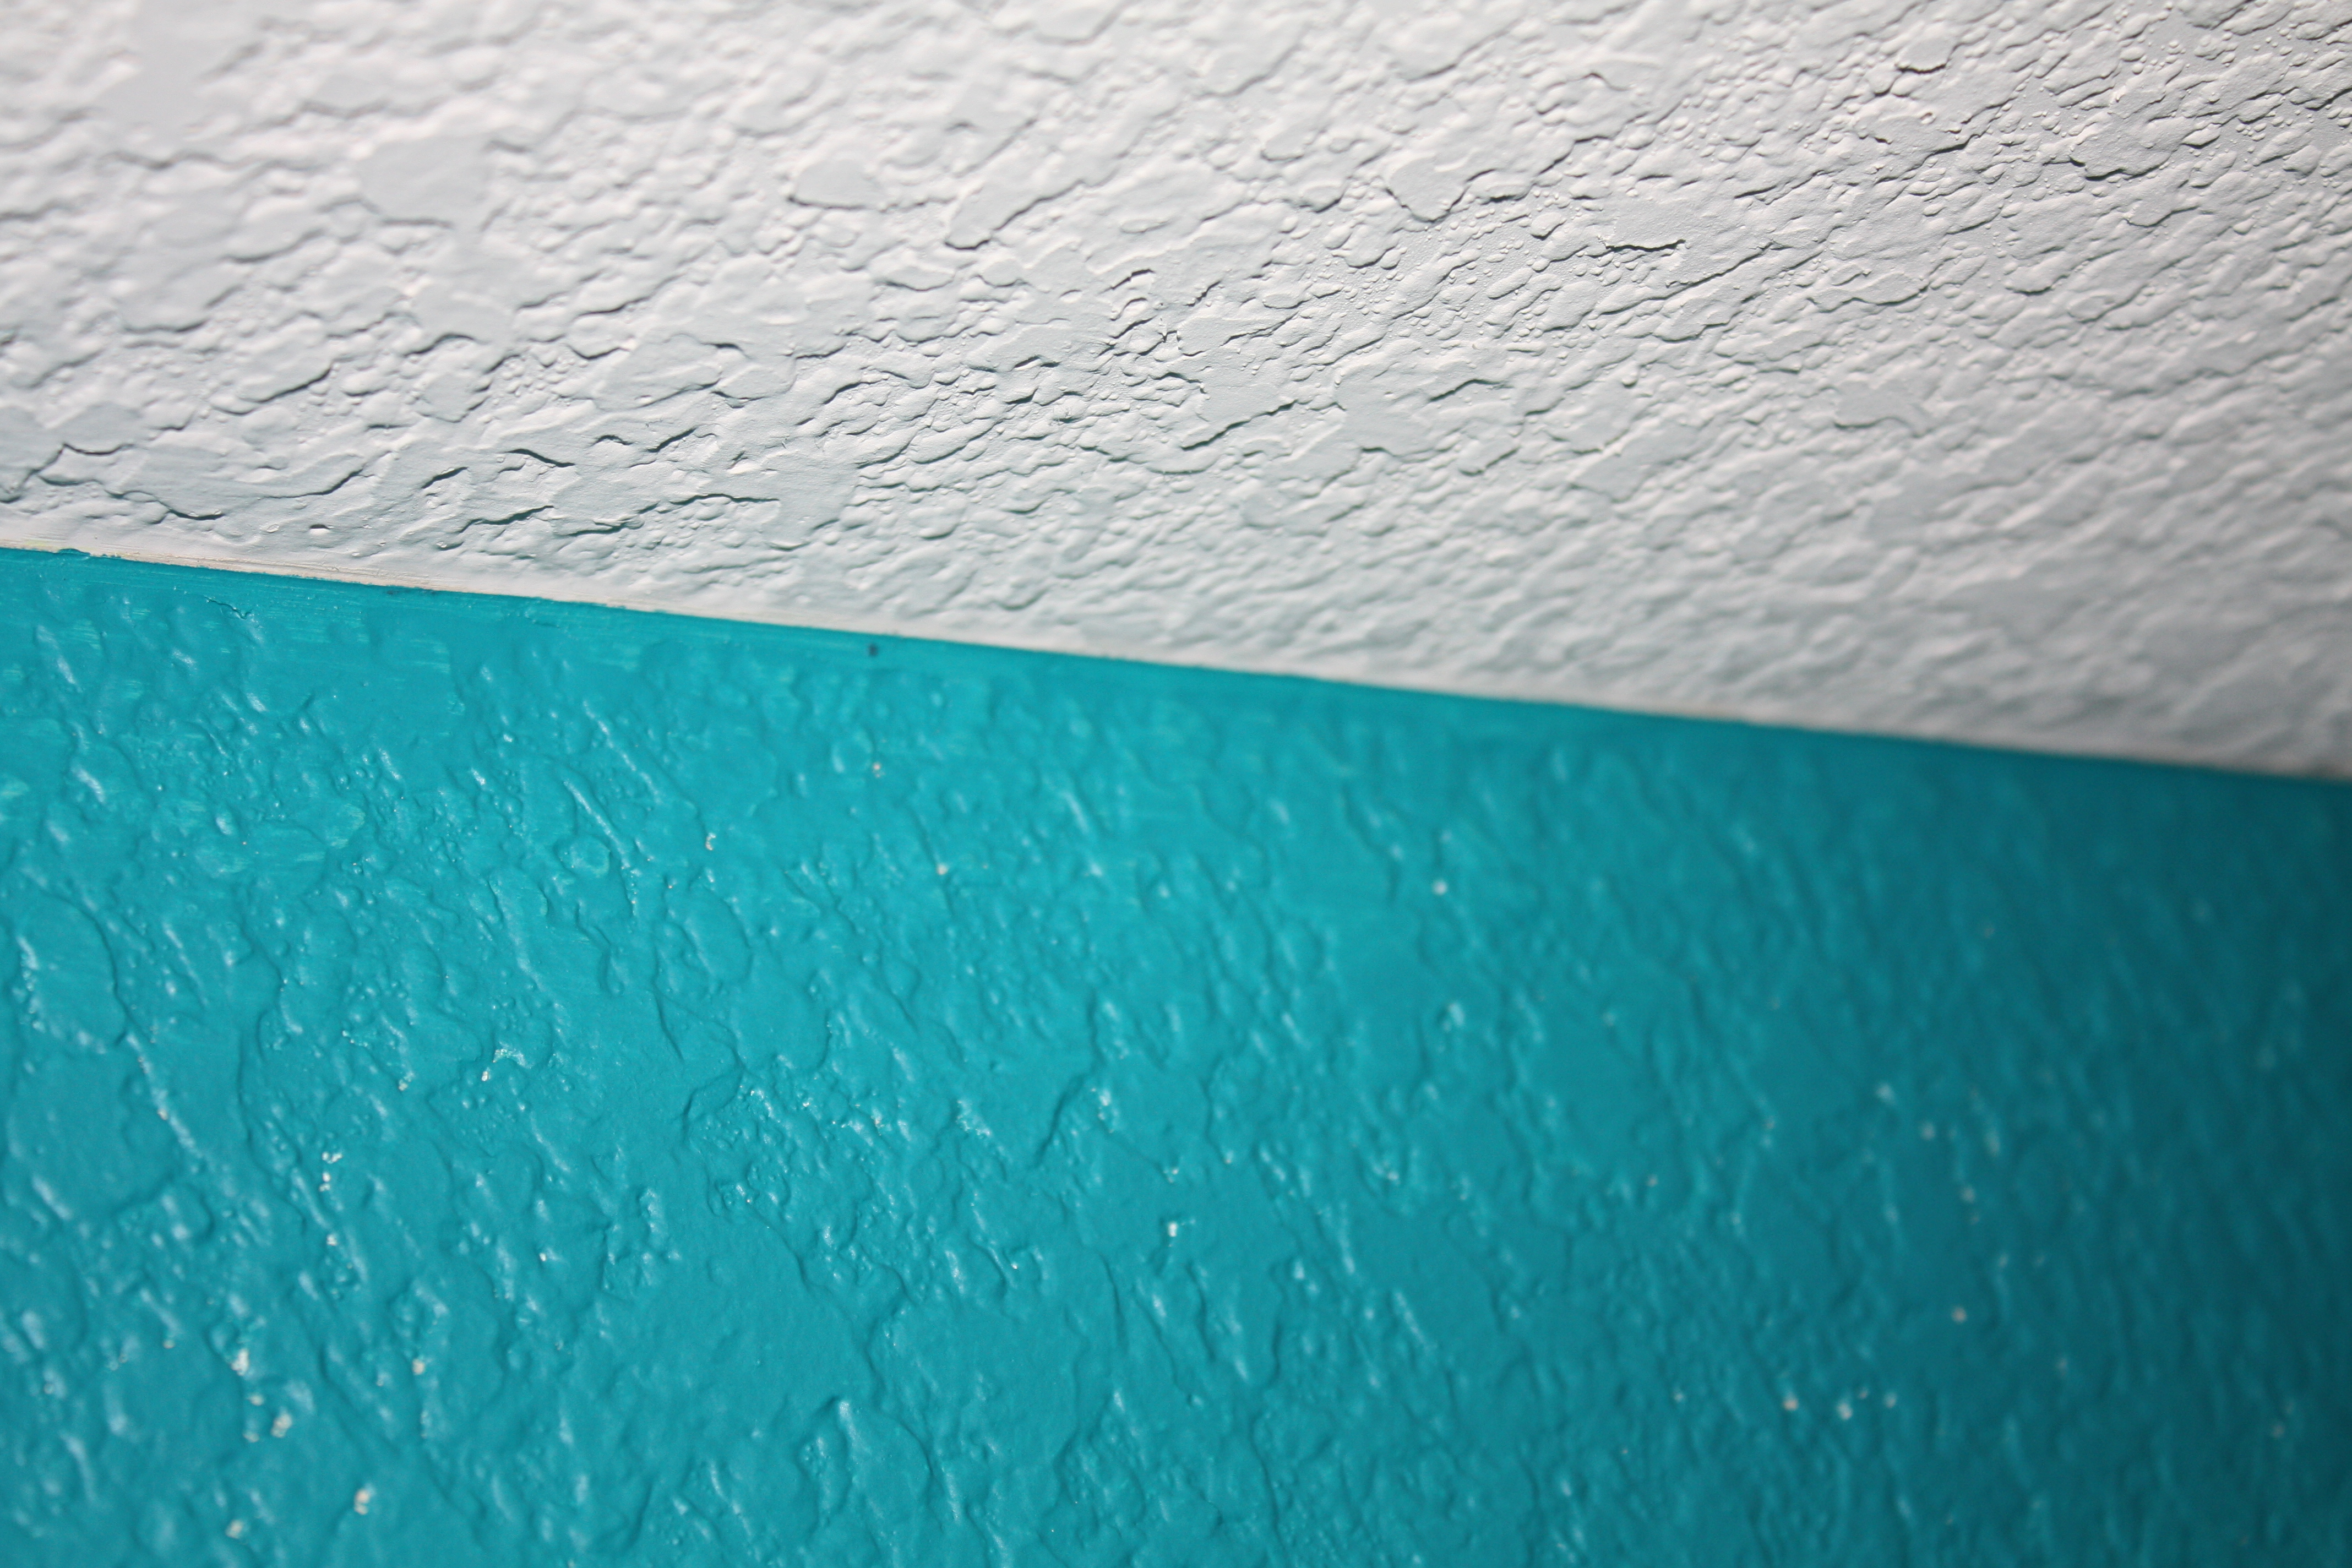 Dadvice Painting Textured Walls The EveryDad